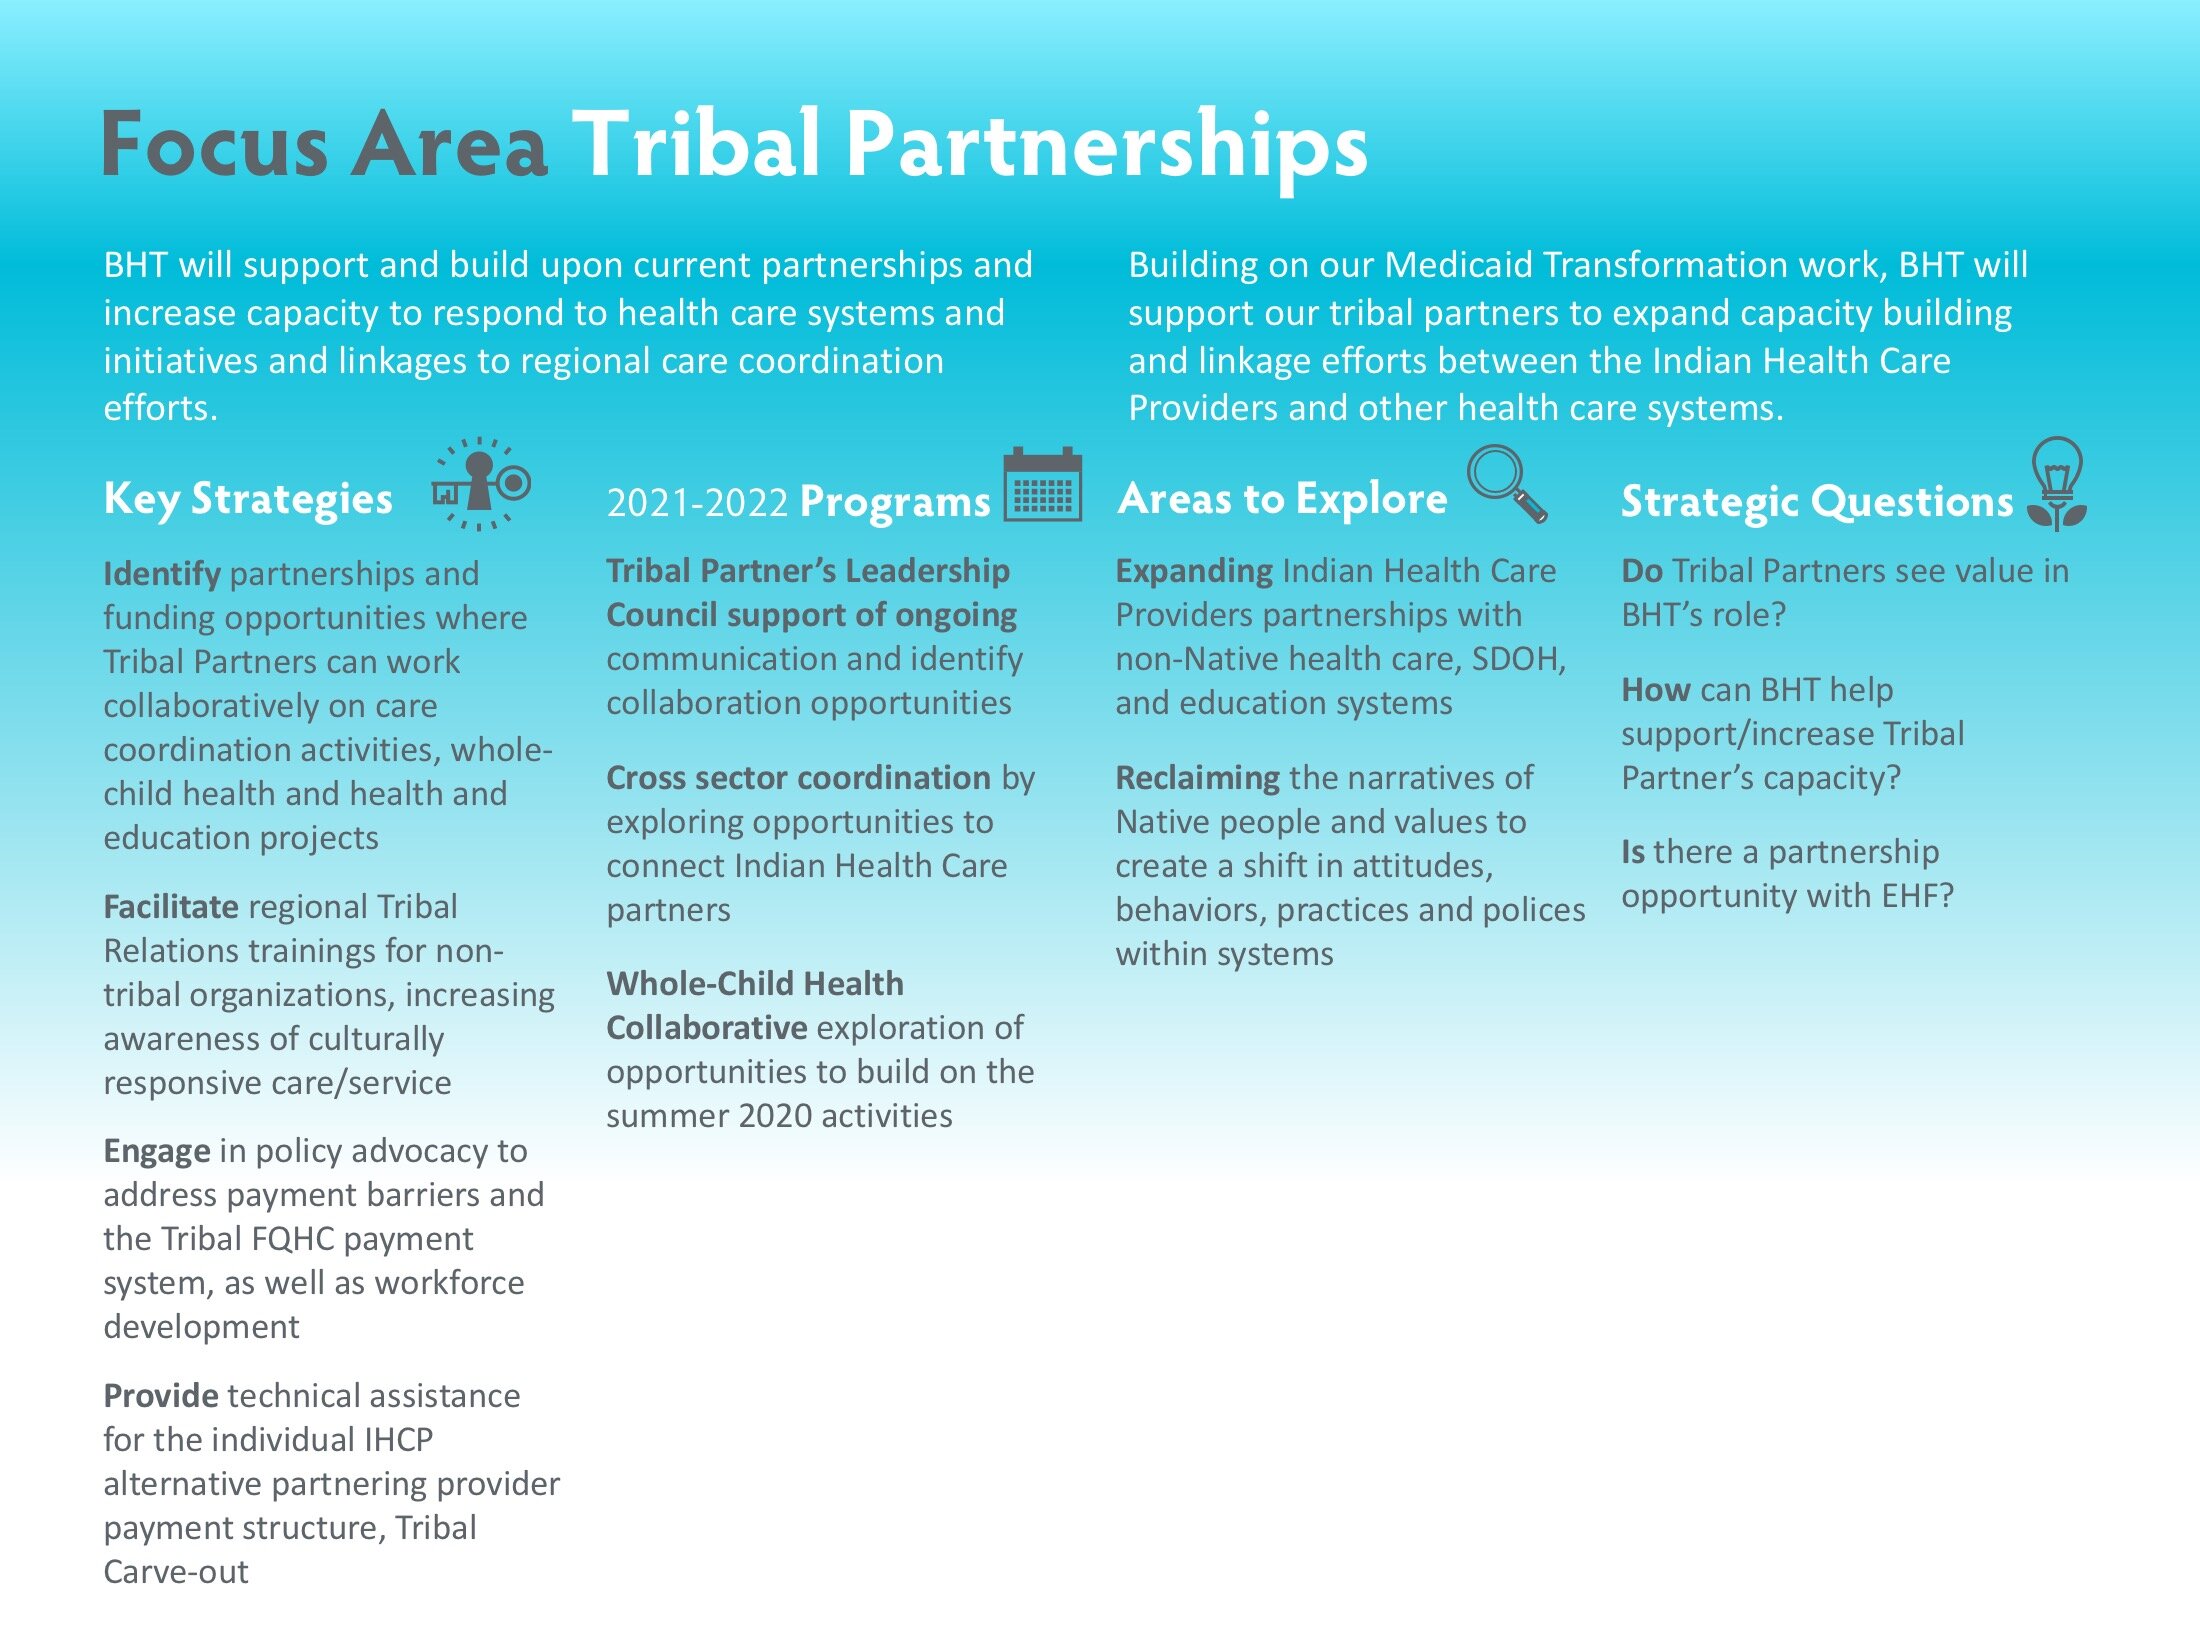 The differences between the existing tribal and nontribal